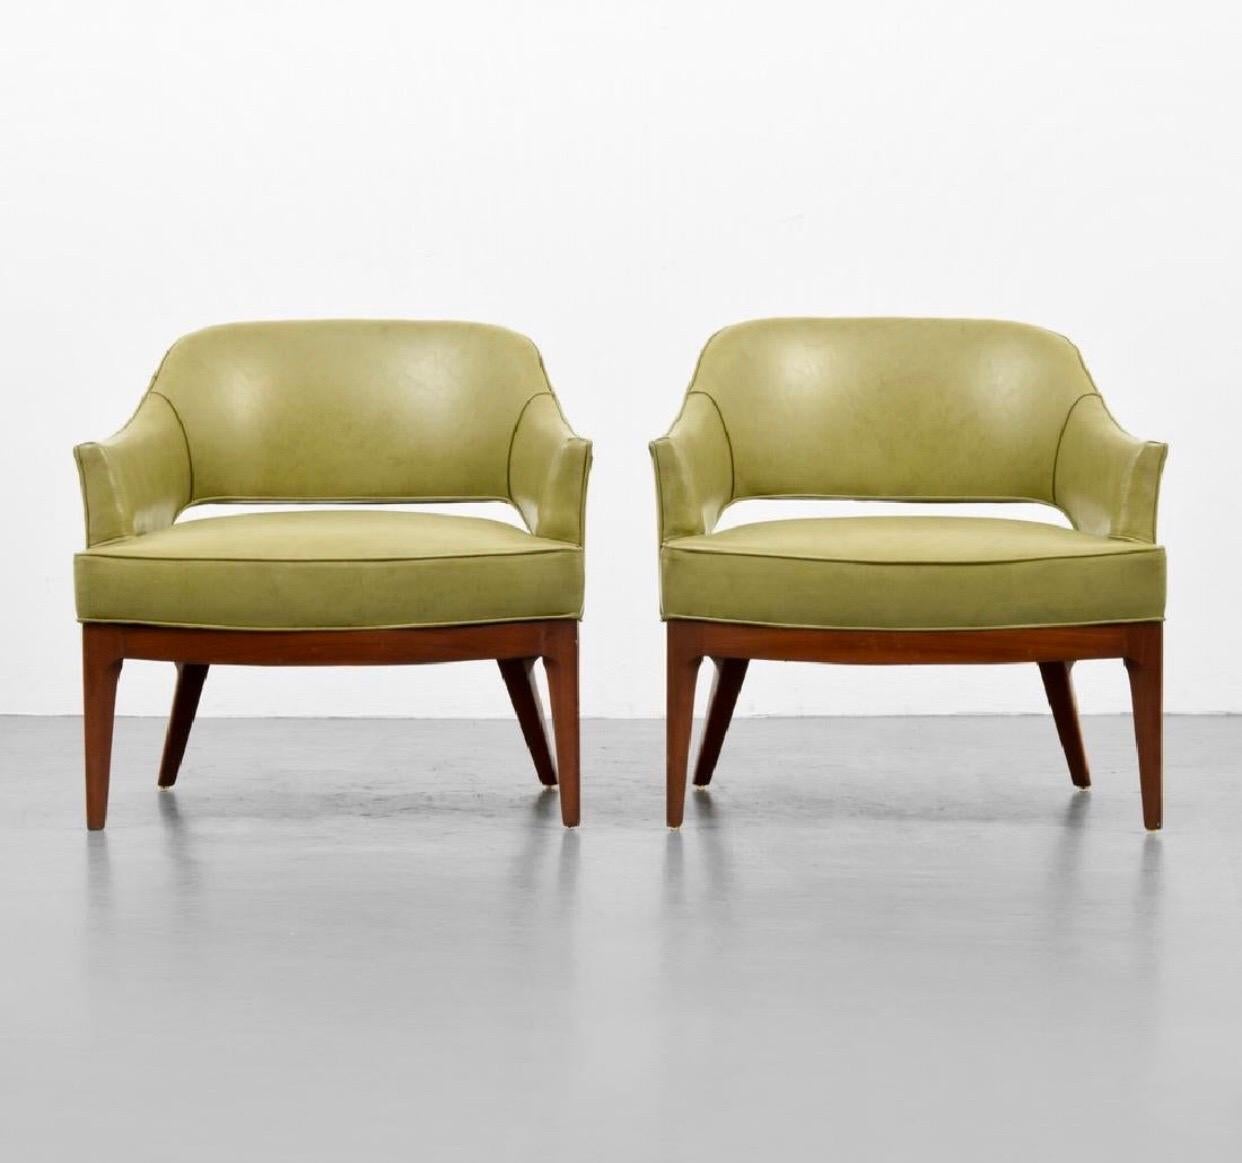 Mid-Century Modern low slung club chairs by Harvey Probber. Chairs feature sculpted walnut legs with a curved front, and stunning original green Naugahyde. On the inside of one leg towards the top of the leg there is a chip in the wood. (not